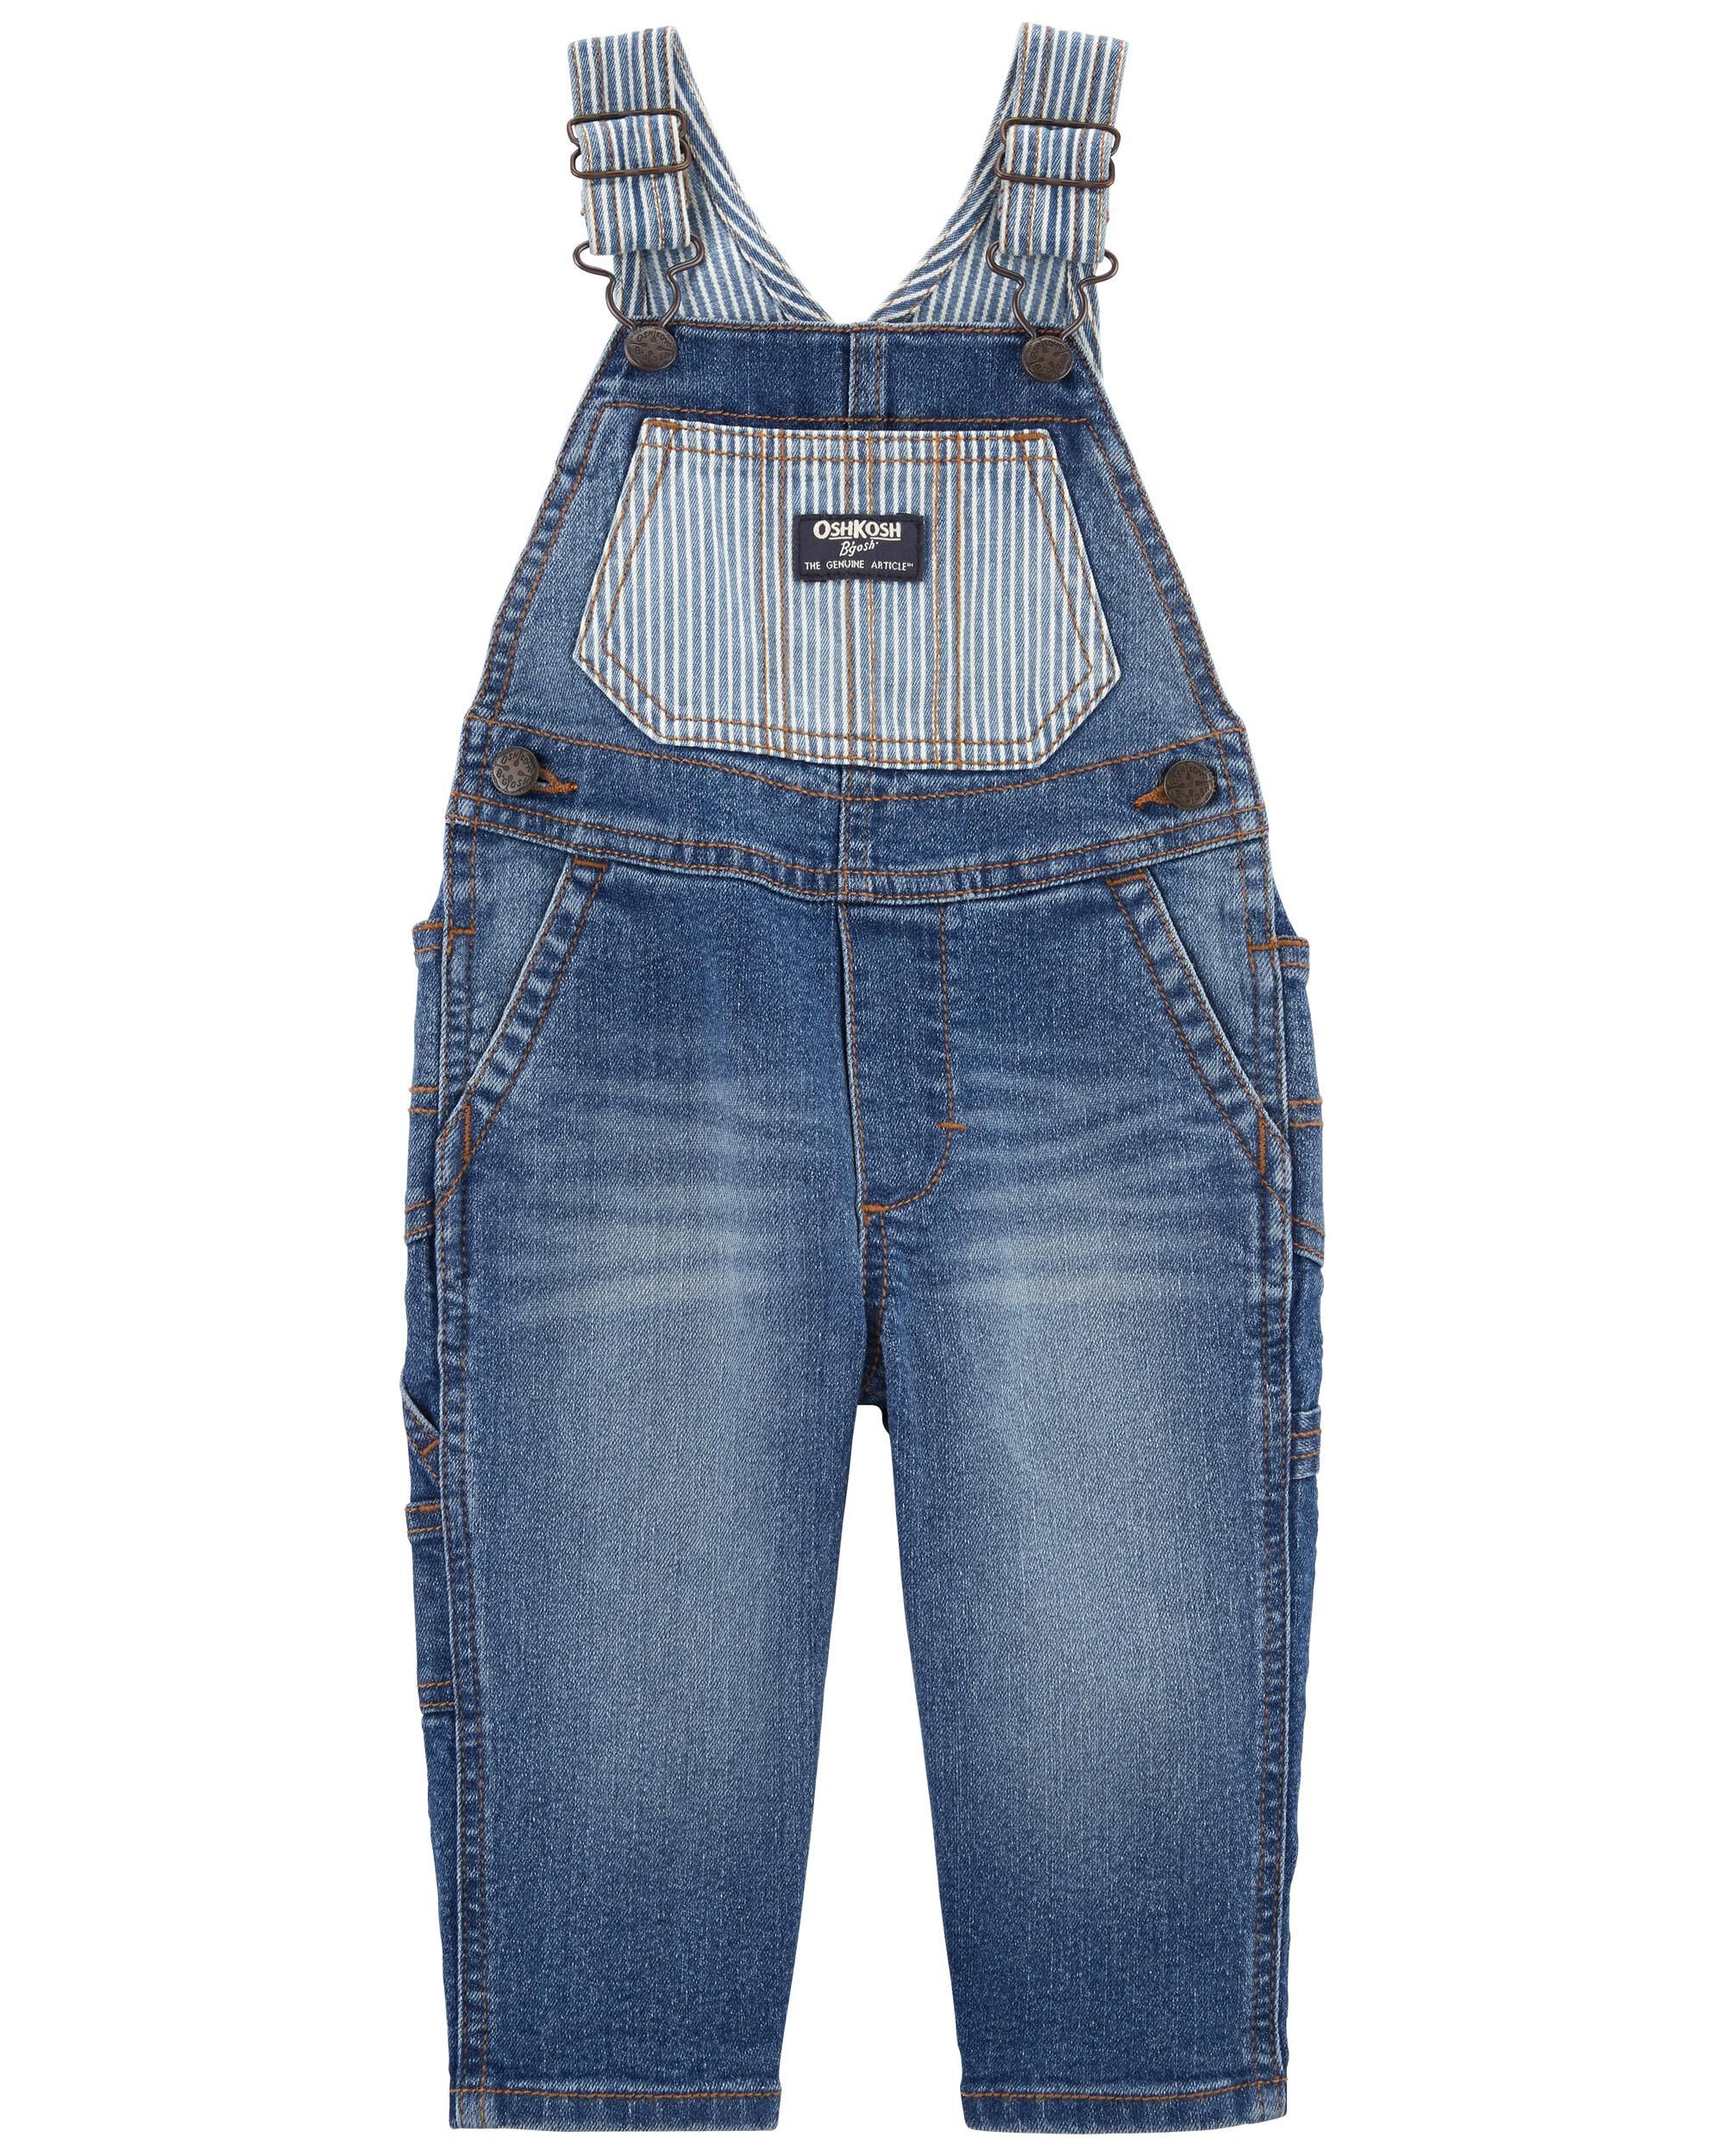 Baby Favorite Overalls: Hickory Stripe Remix Carter's